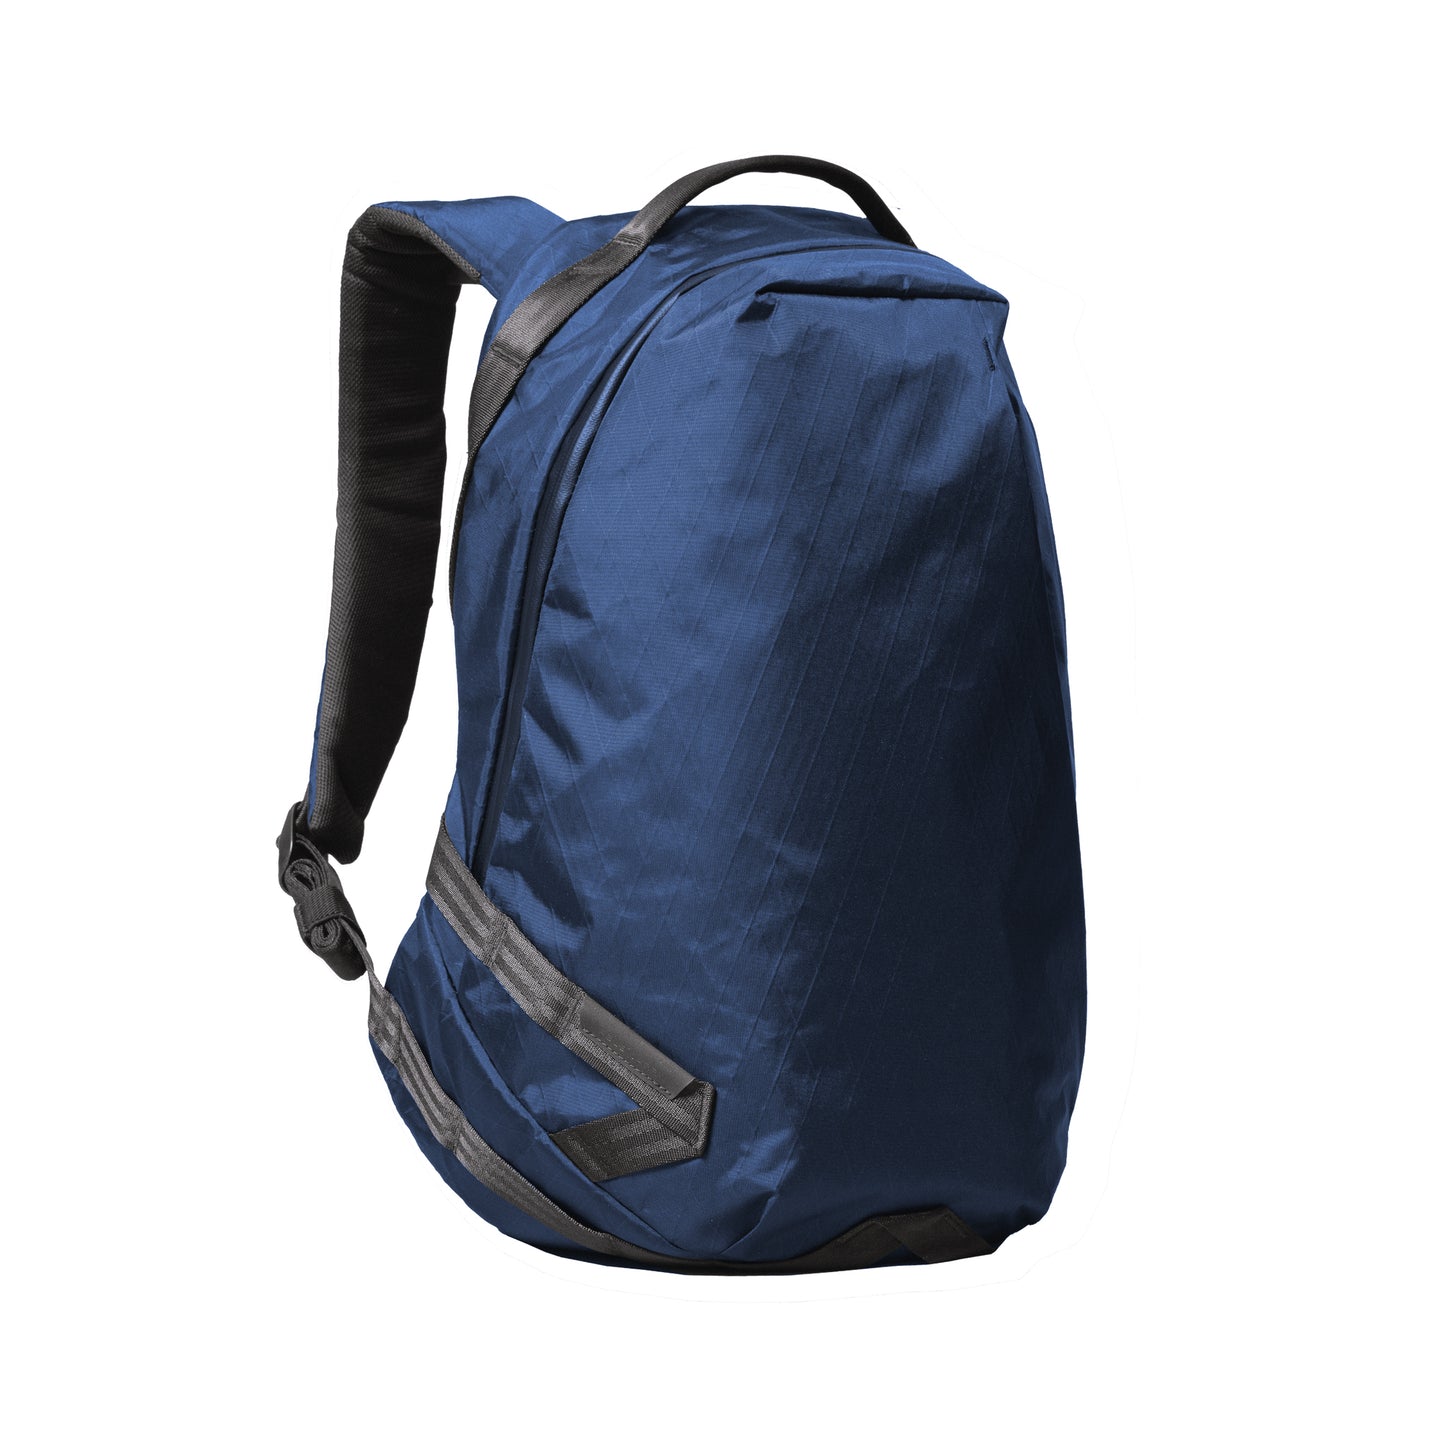 ABLE CARRY DAILY PLUS BACKPACK - NAVY